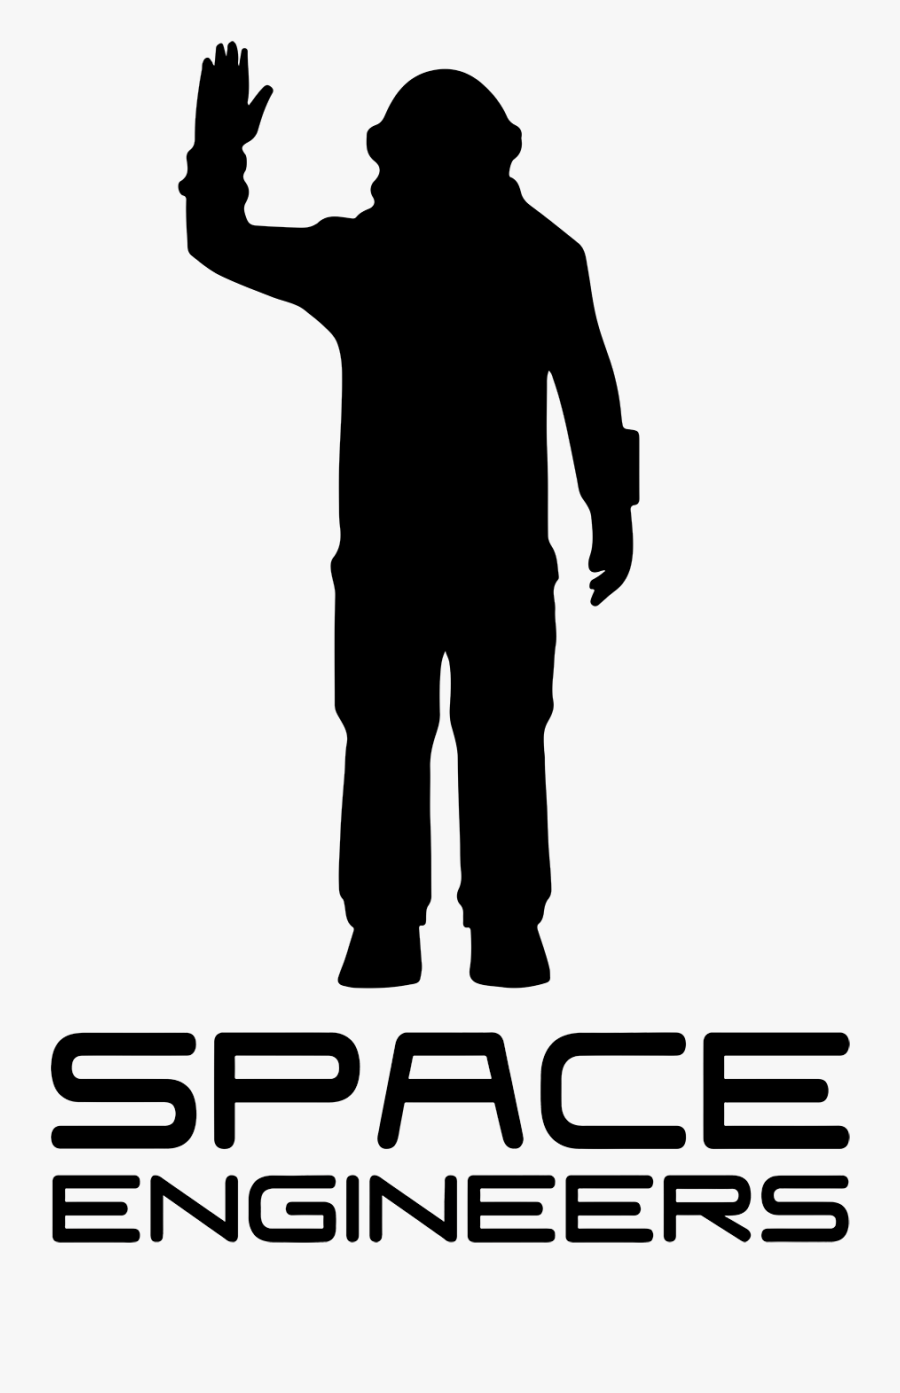 Spacelogoblack - Space Engineers, Transparent Clipart